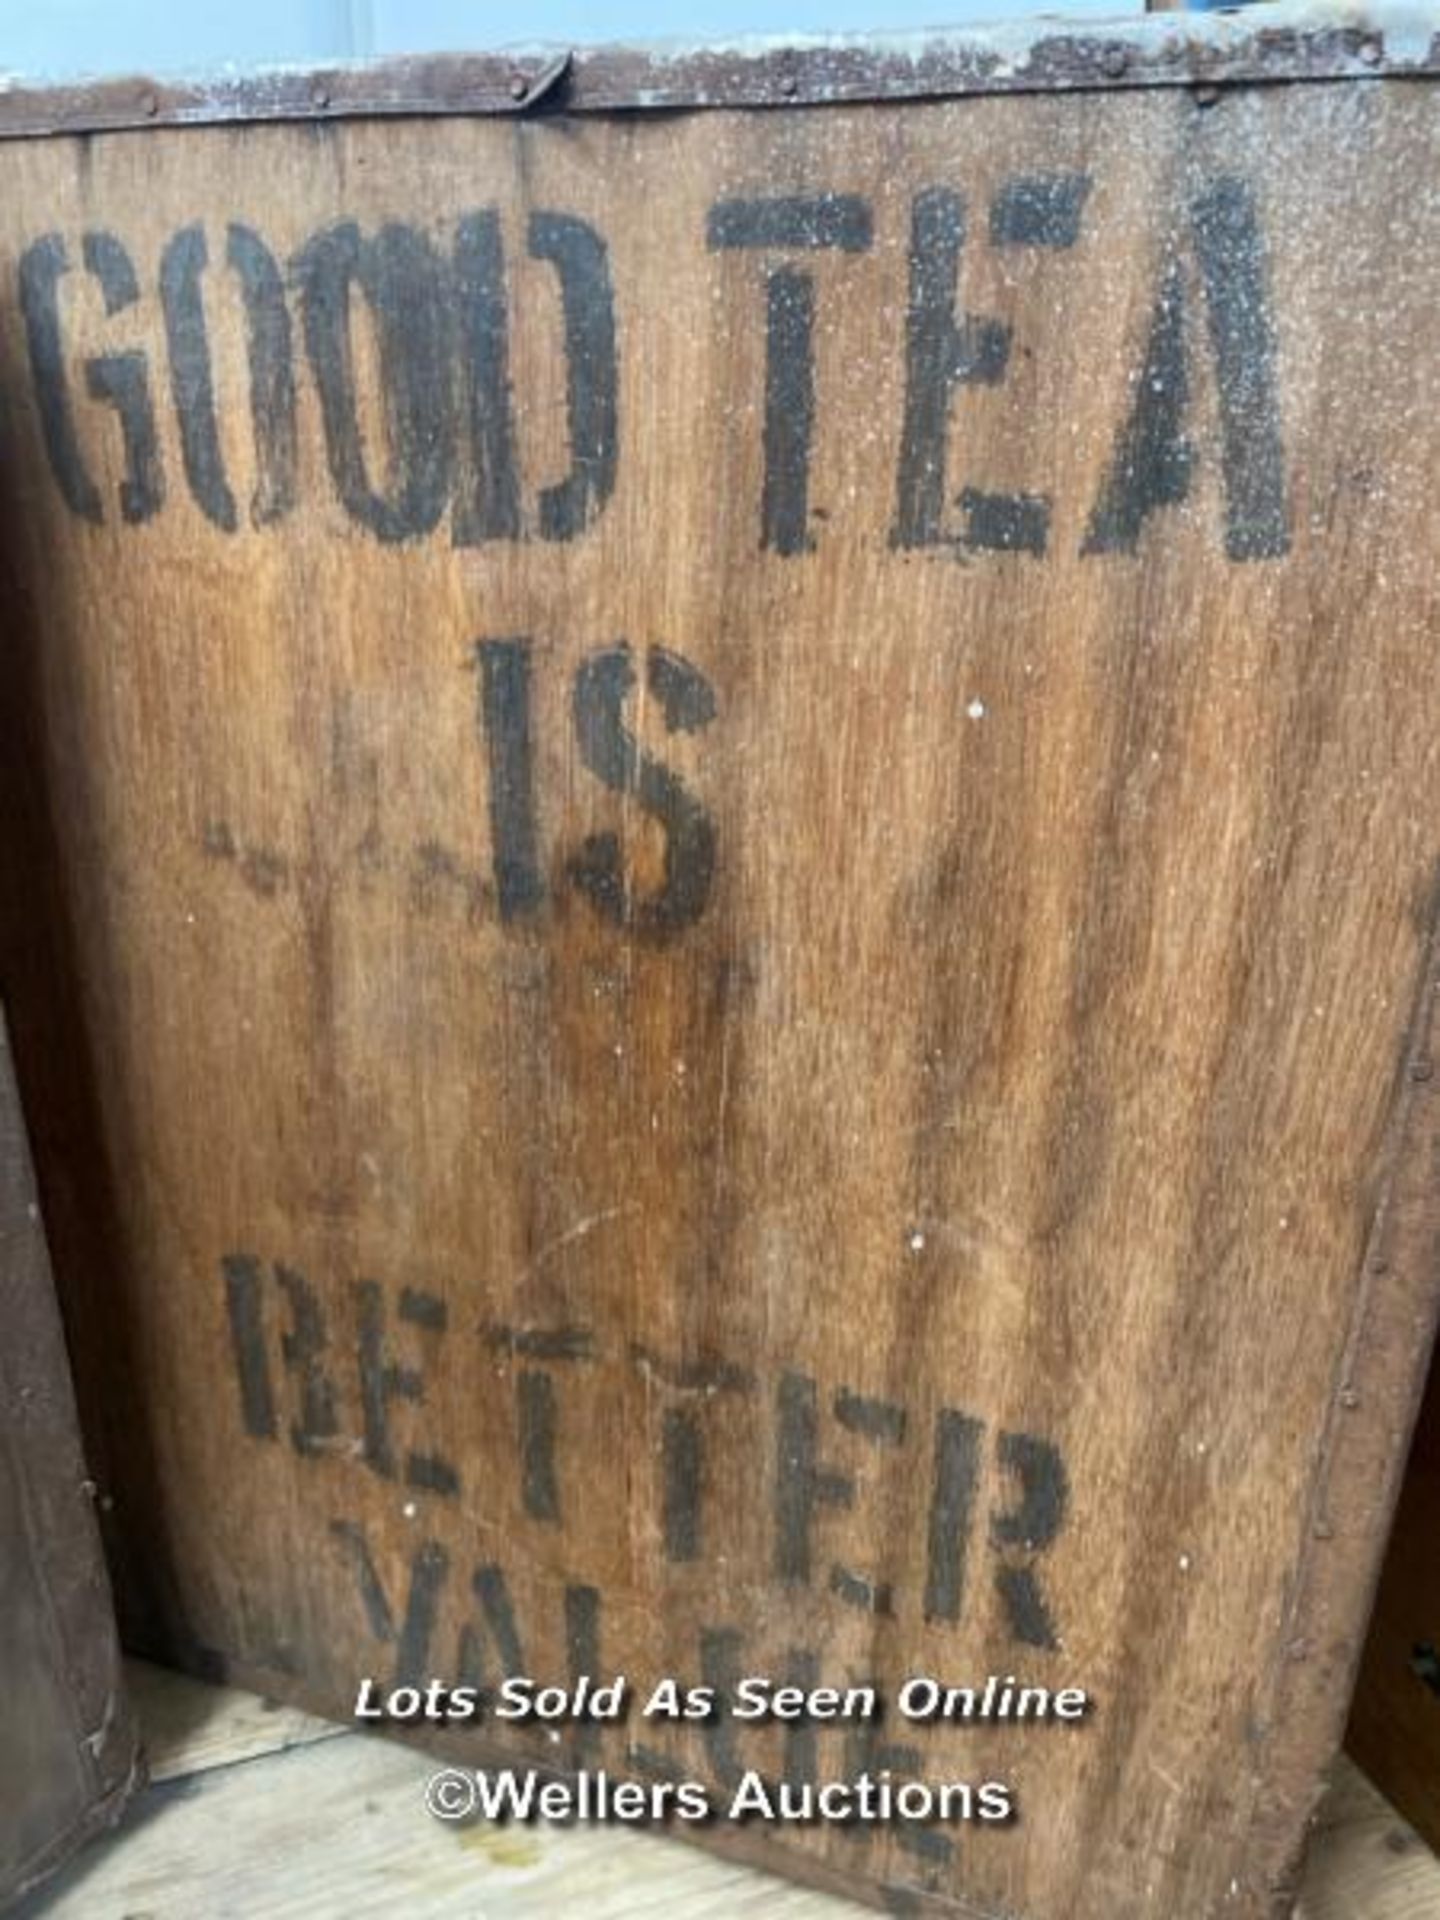 2X WOODEN CRATES, ONE PRINTED AS PHILIBARI UK 149, GOOD TEA IS BETTER VALUE, 60CM (H) X 50CM (W) X - Image 3 of 3